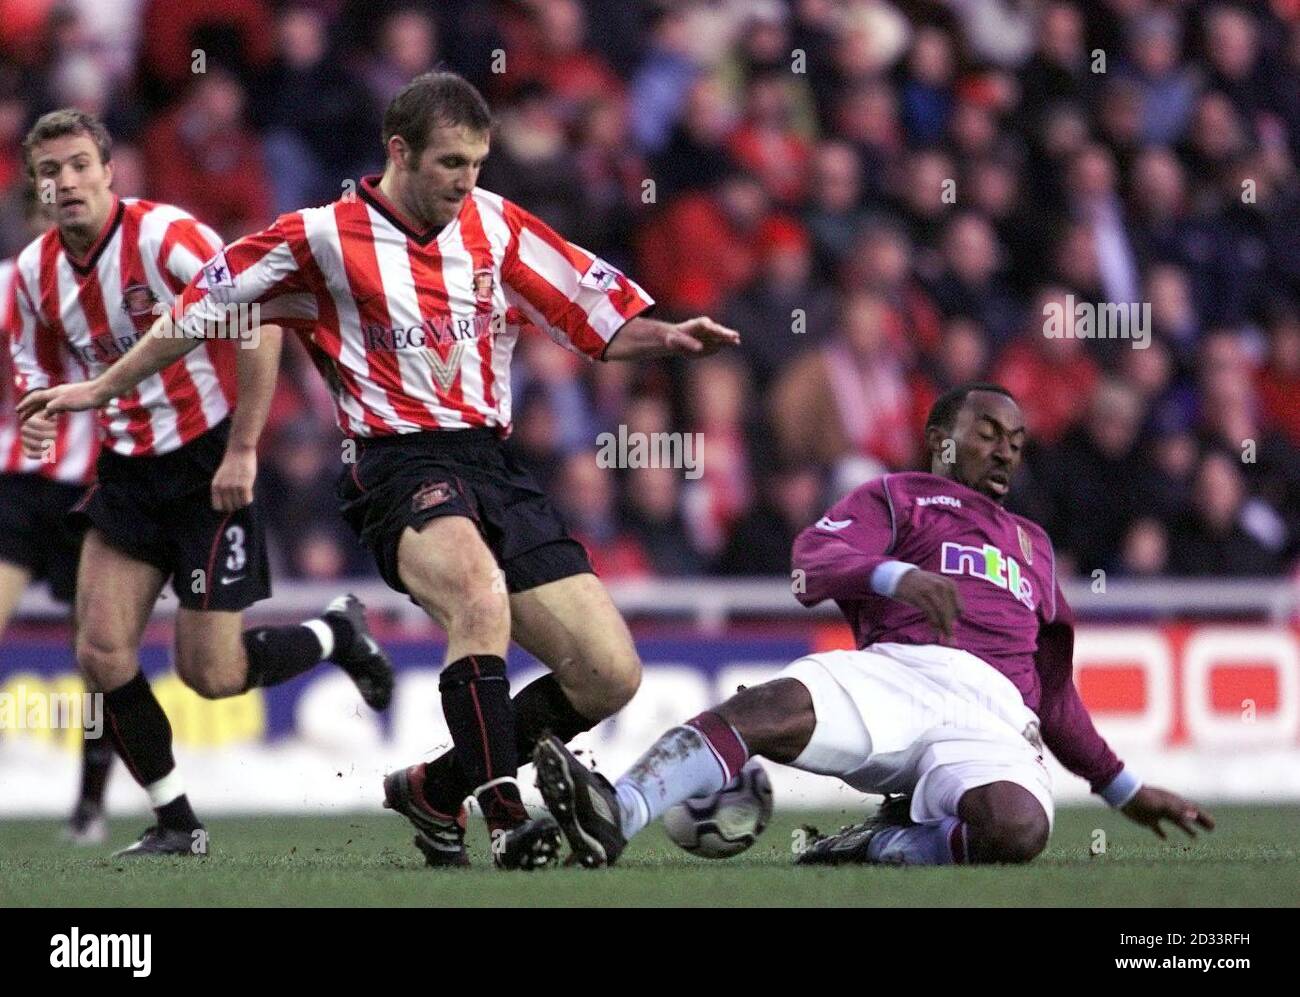 Sunderland's Darren Williams (centre) battles with Aston Villa's Darius Vassel (right) during their FA Barclaycard Premiership match at Sunderland's Stadium of Light. THIS PICTURE CAN ONLY BE USED WITHIN THE CONTEXT OF AN EDITORIAL FEATURE. NO WEBSITE/INTERNET USE OF PREMIERSHIP MATERIAL UNLESS SITE IS REGISTERED WITH football ASSOCIATION PREMIER LEAGUE. Stock Photo